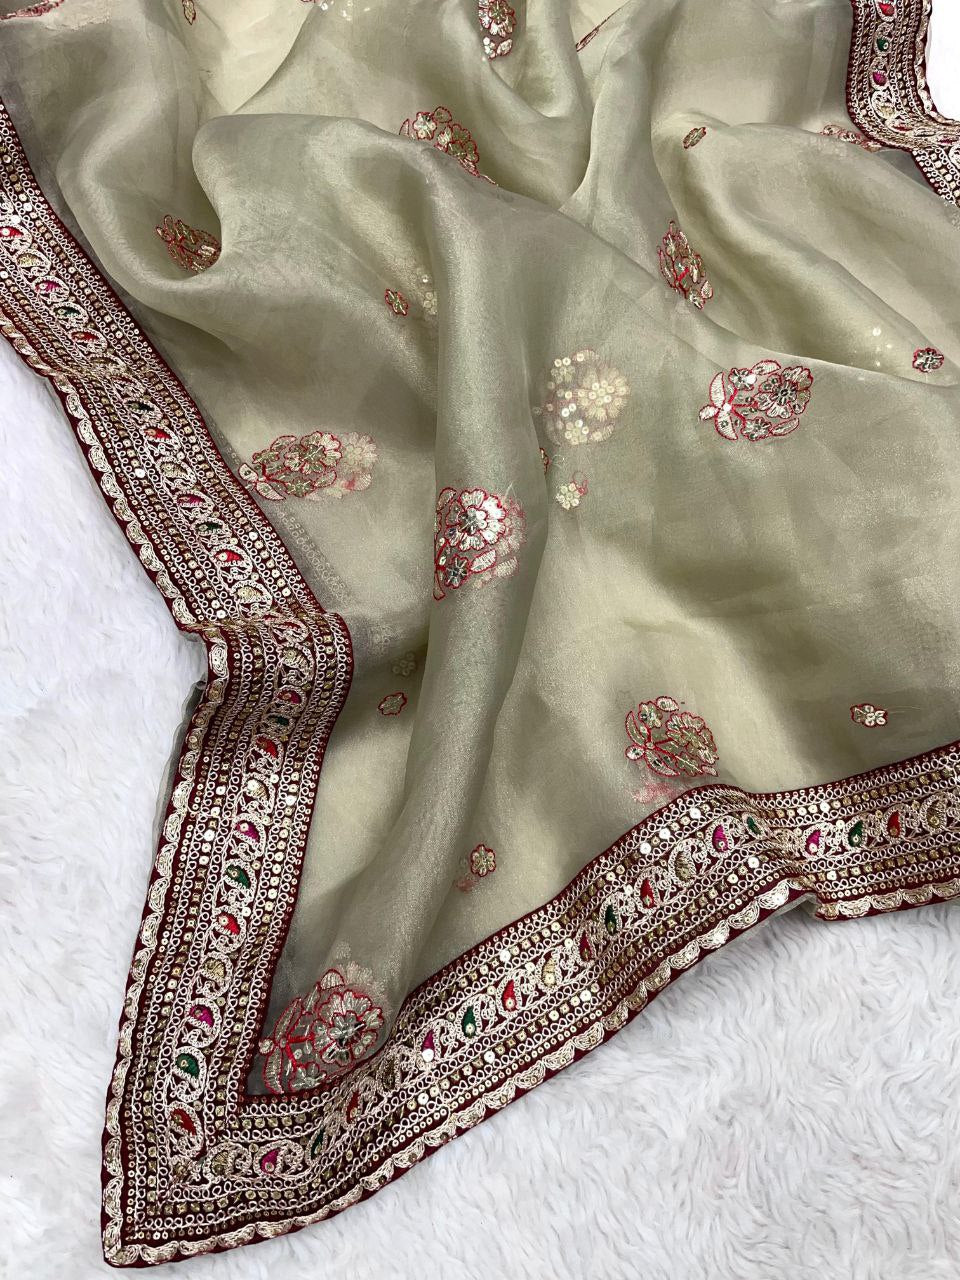 Wrap yourself in luxury with our Soft Organza Silk Saree! ✨